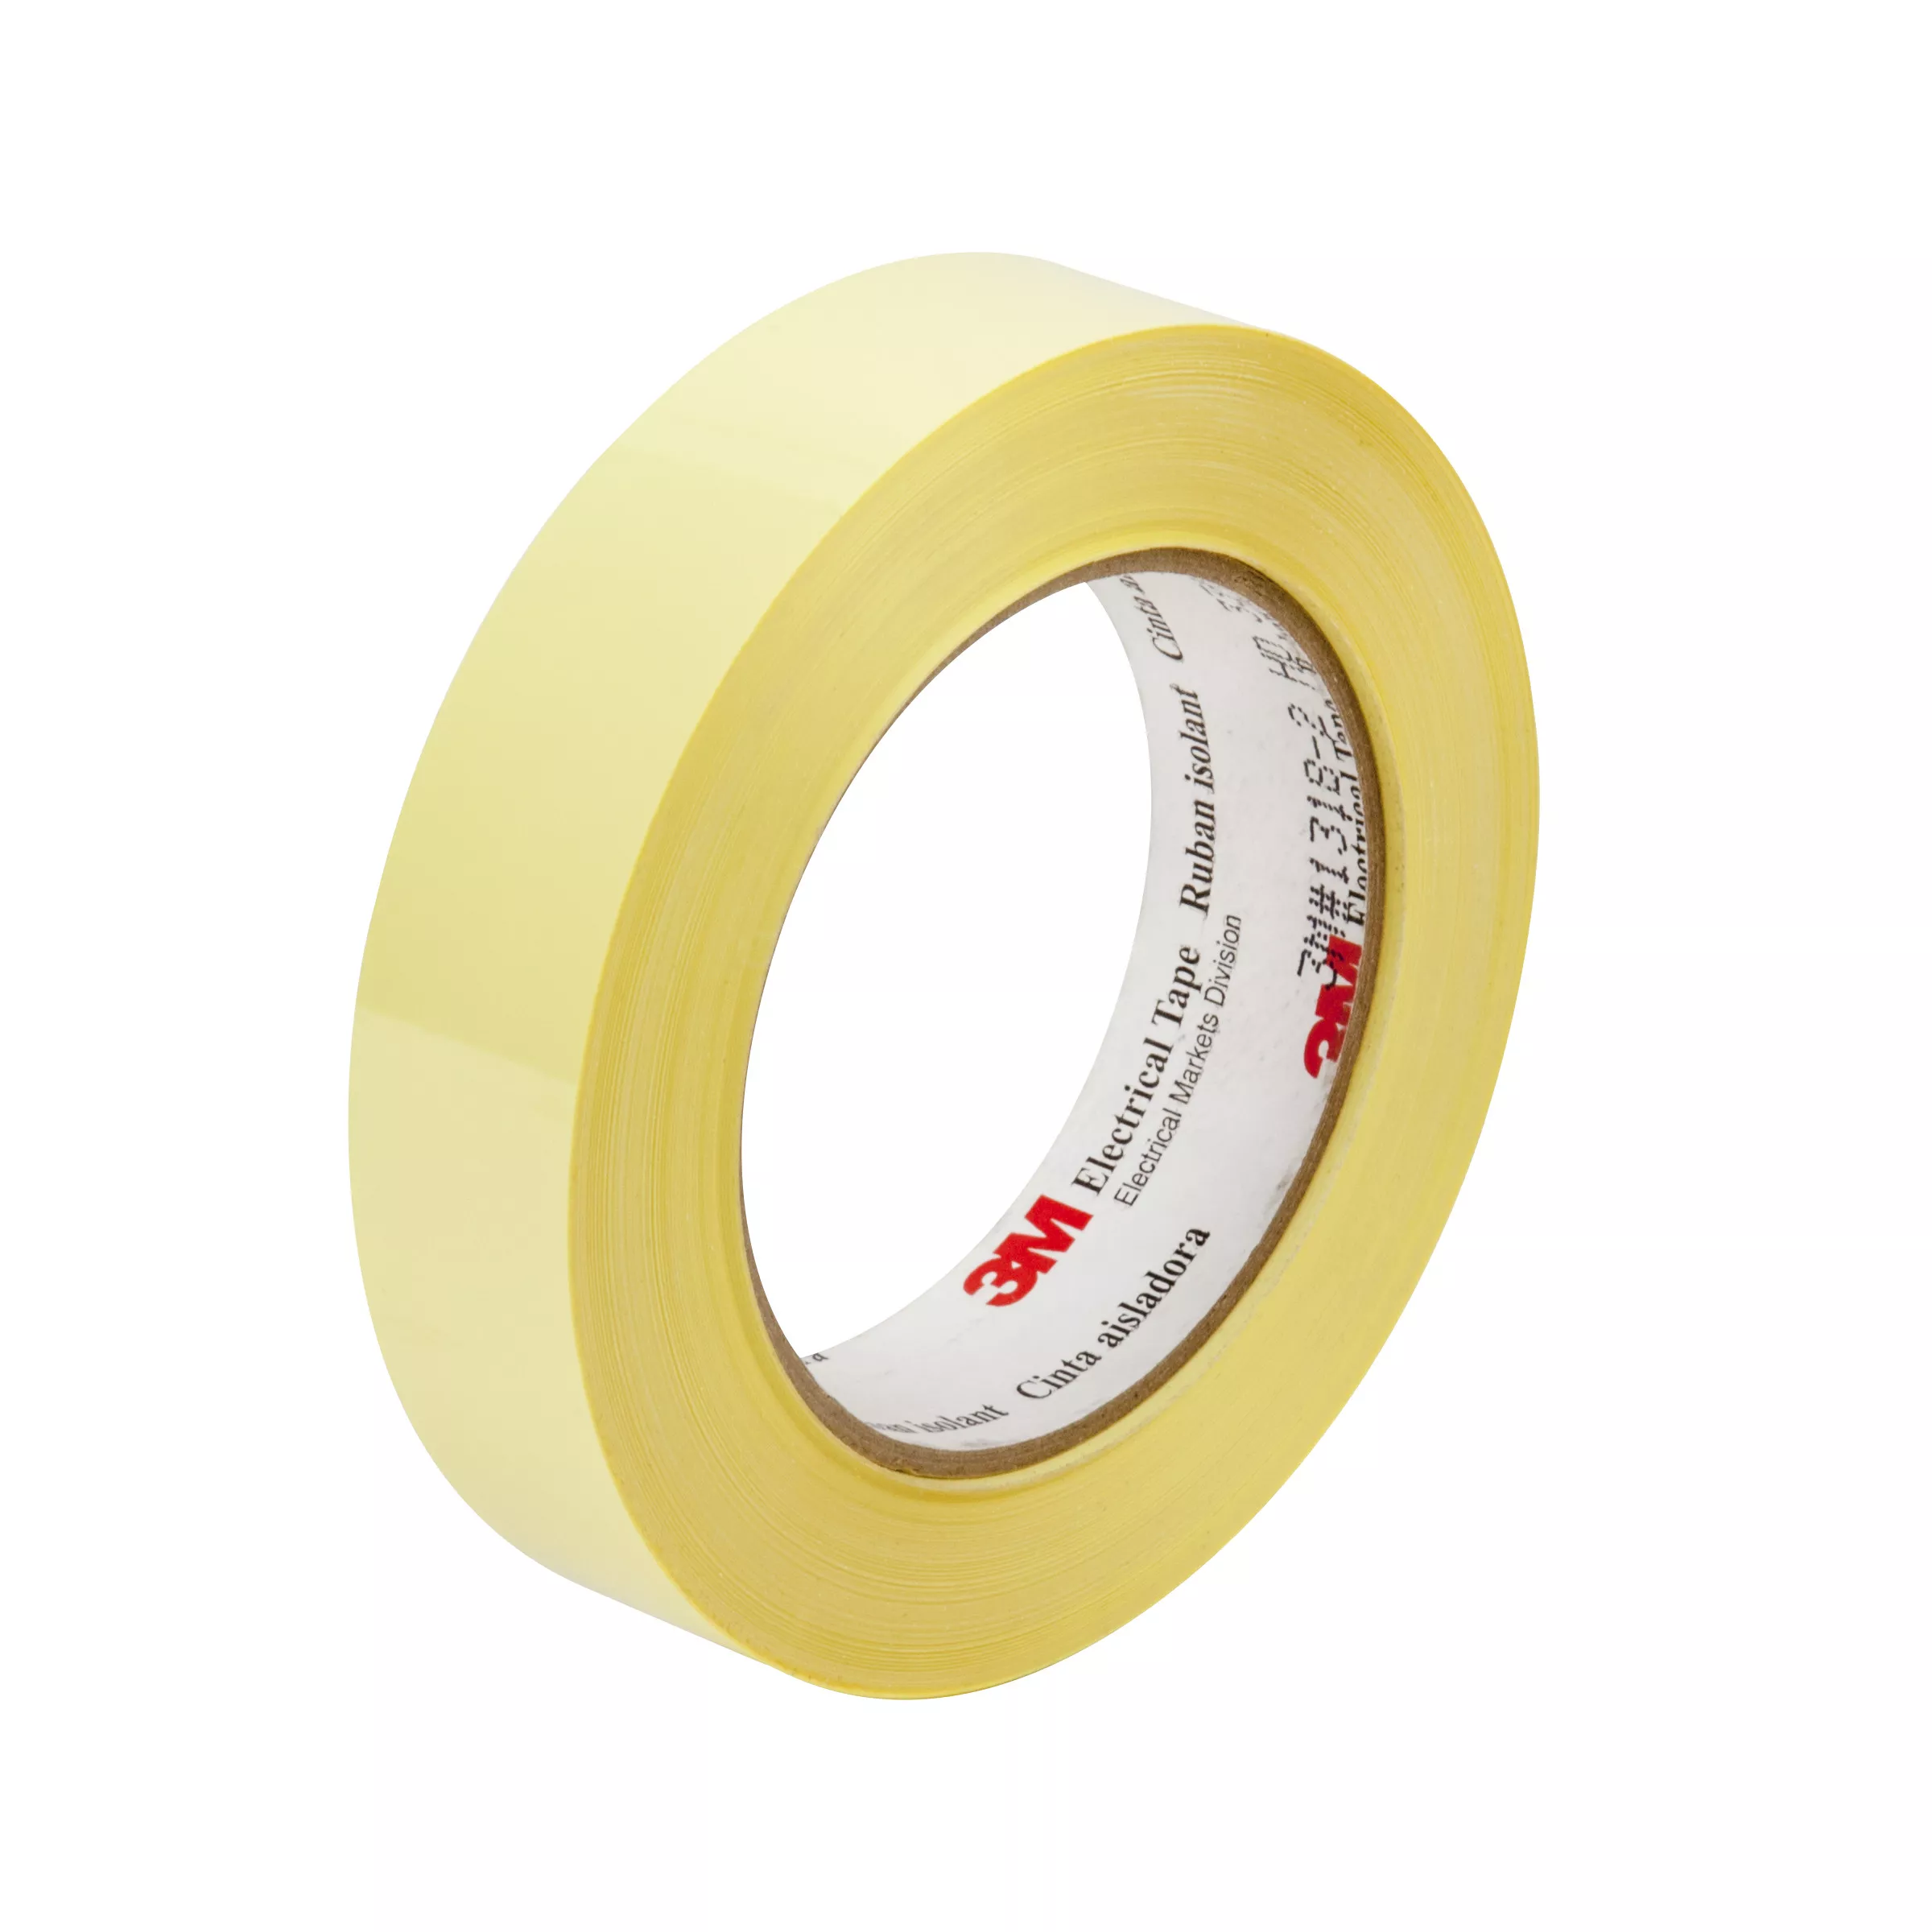 SKU 7010293626 | 3M™ Polyester Film Electrical Tape 1350F-2